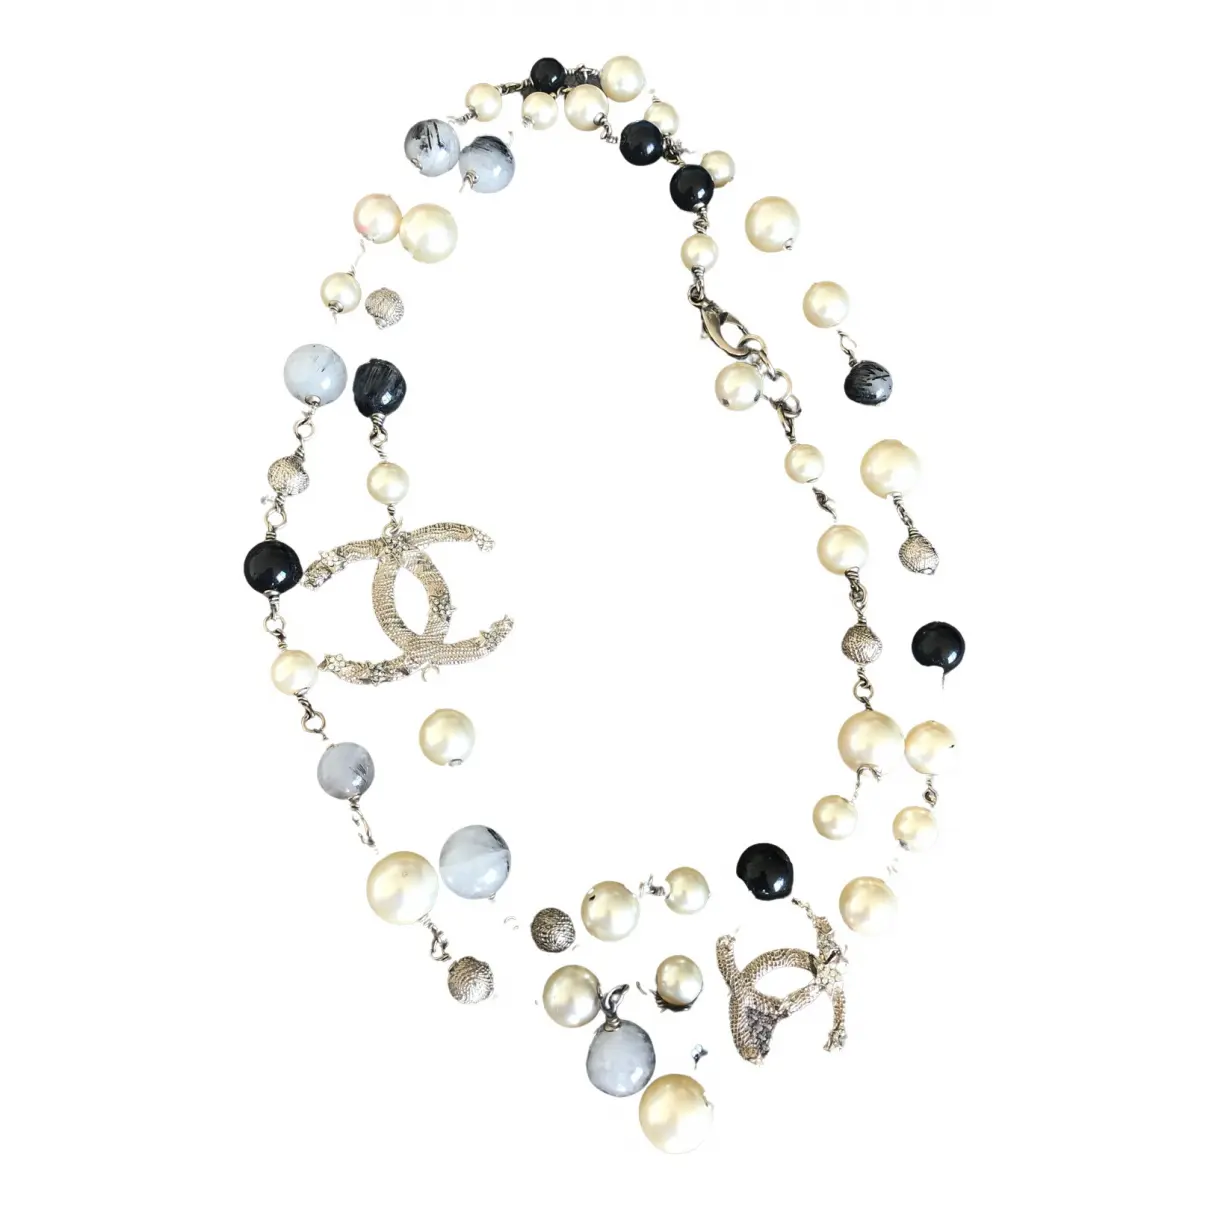 CC pearls long necklace Chanel